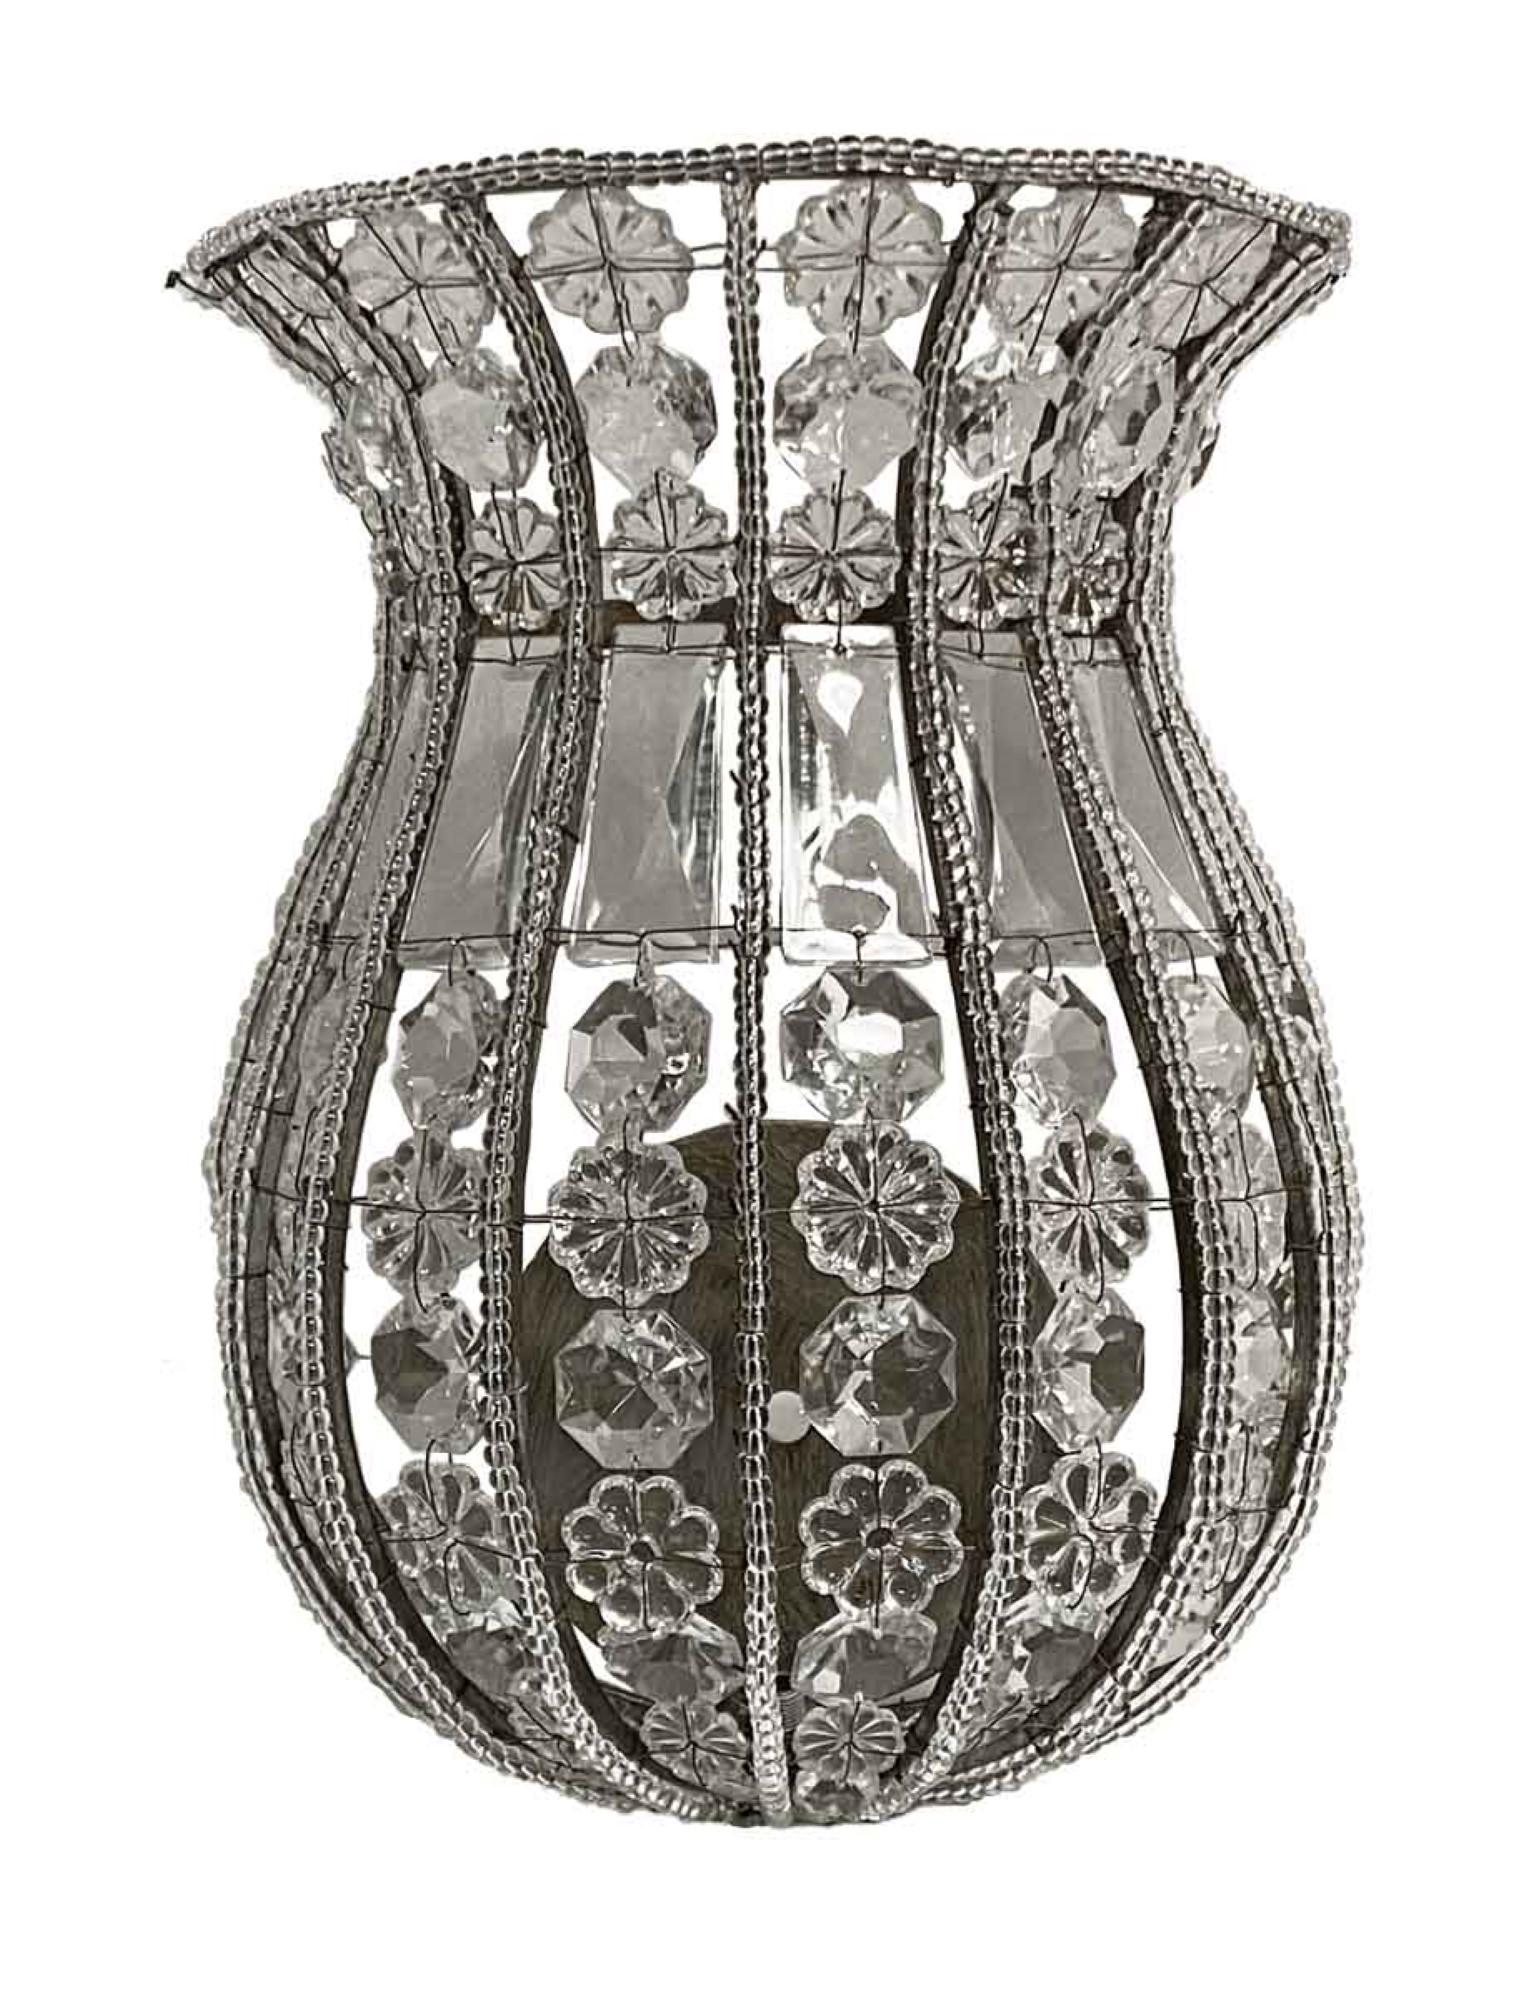 Contemporary 2000s Venetian Crystal Basket Wall Sconce Petite Gilt Ribbed Quantity Available